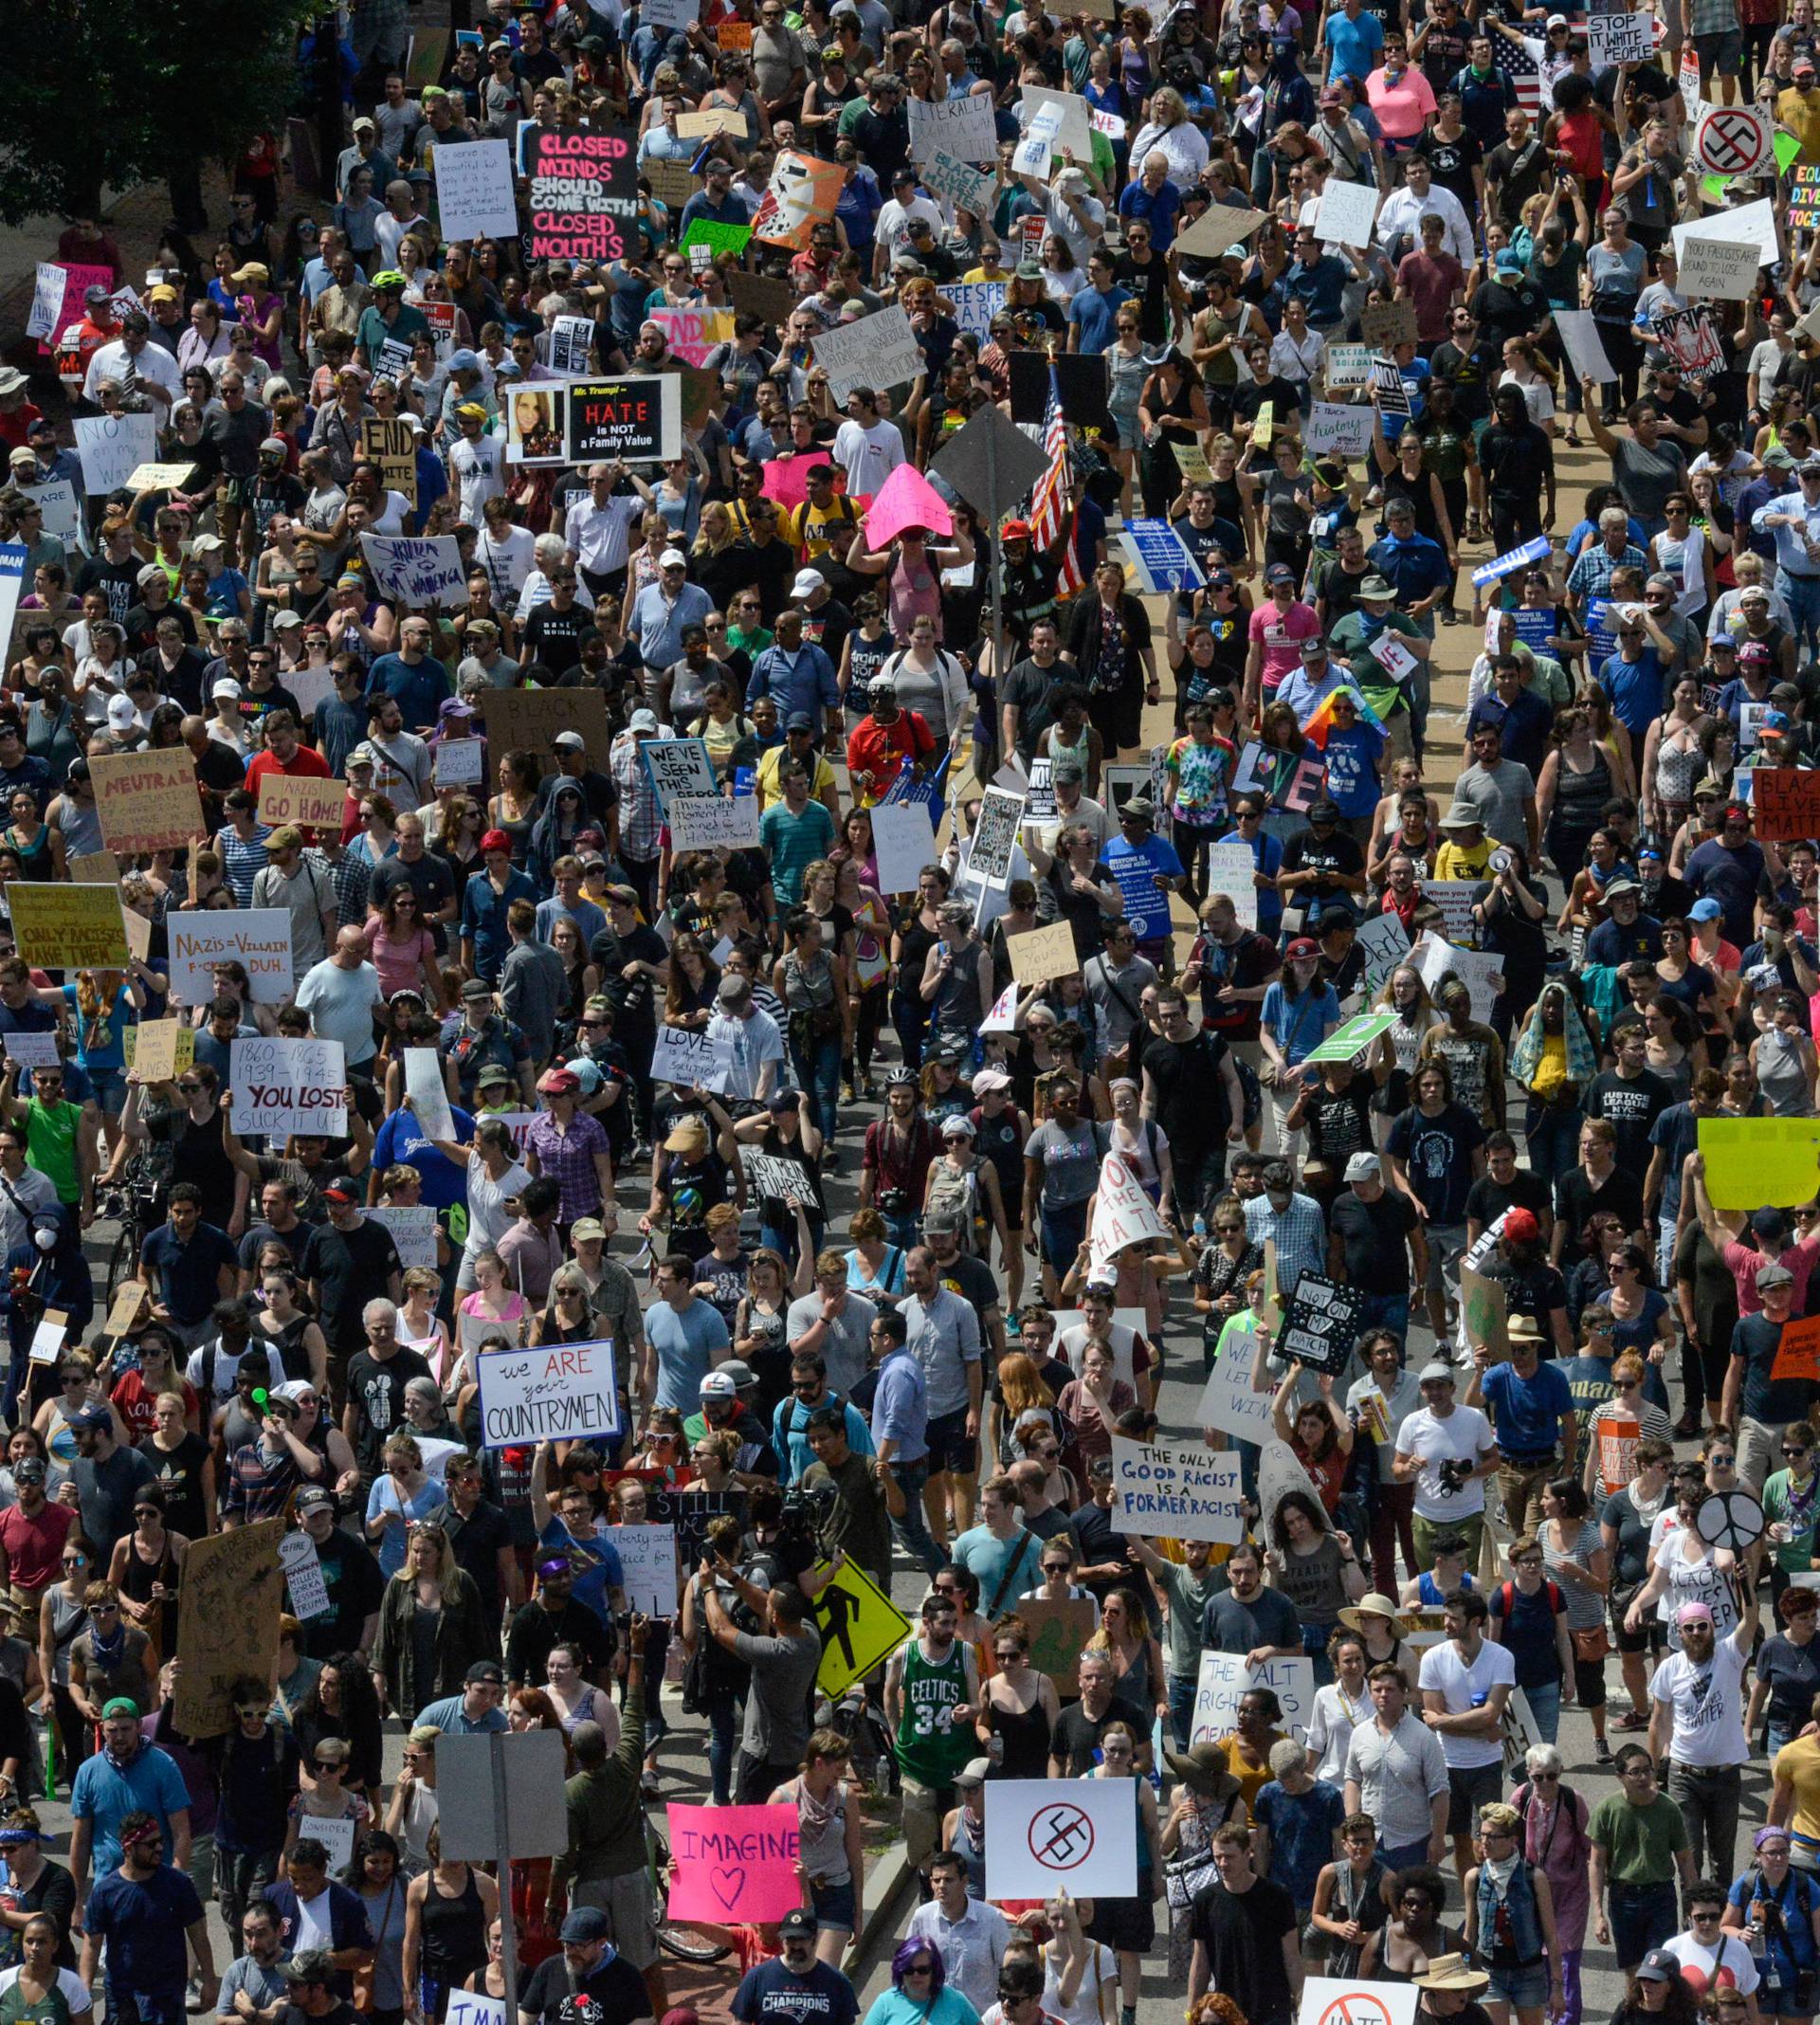 A large crowd of people march towards the Boston Commons to protest the Boston Free Speech Rally in Boston, MA